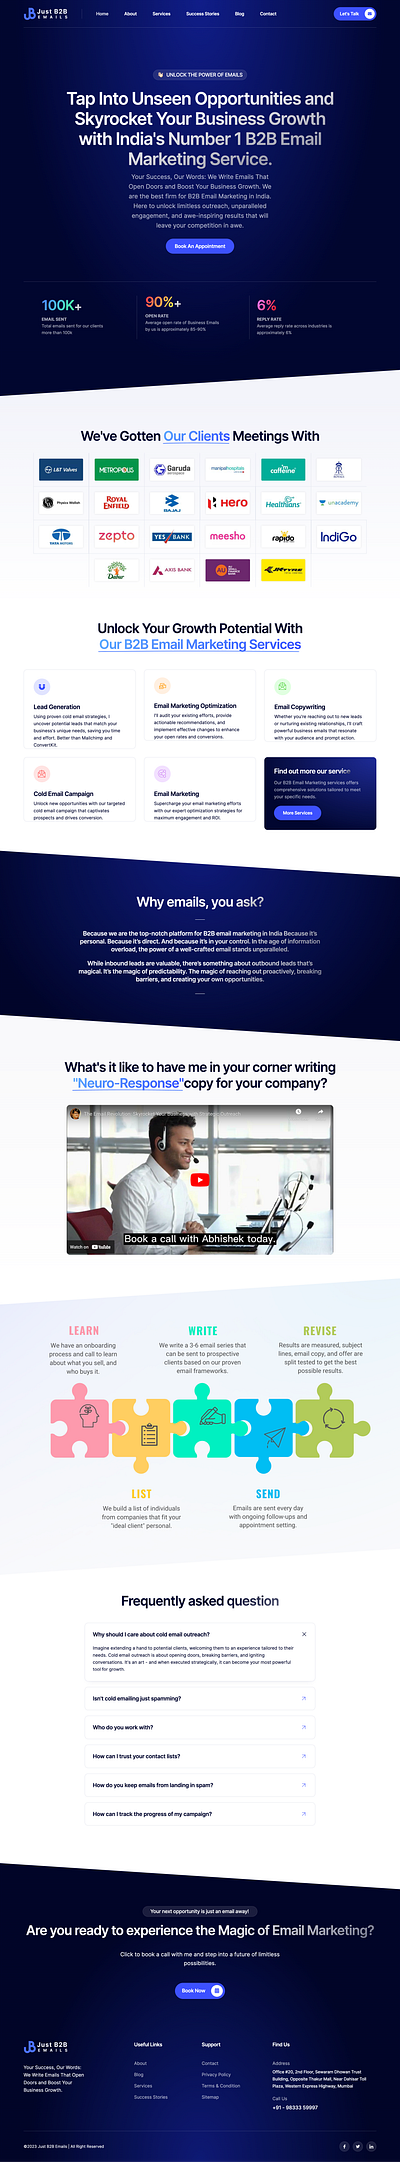 Email Marketing Company Website business website company website design elementor website email marketing landing page marketing agency marketing company website ui website design wordpress wordpress business website wordpress website